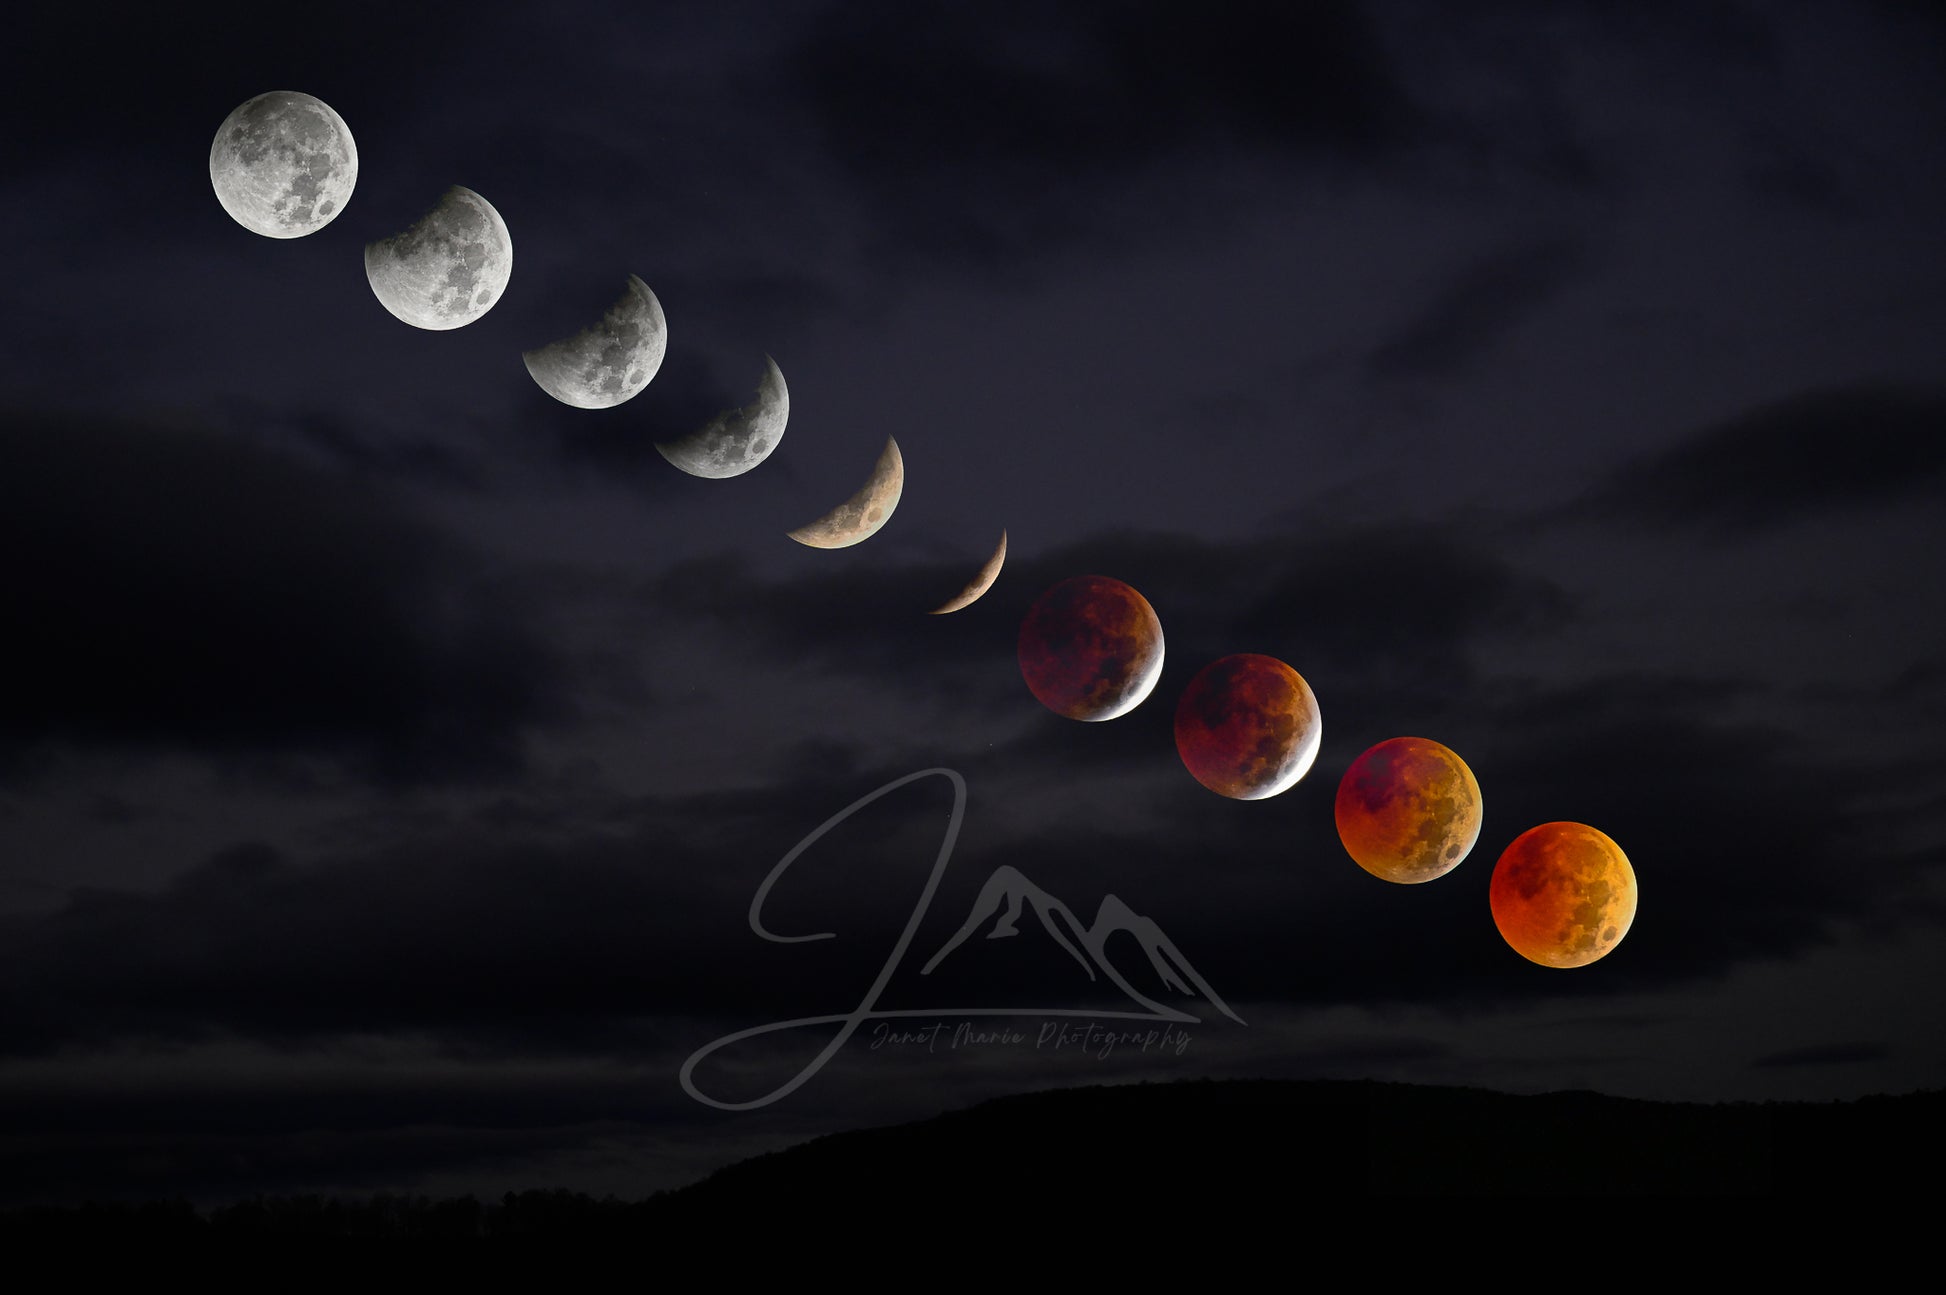 Blood Moon Lunar Eclipse From Lake Placid